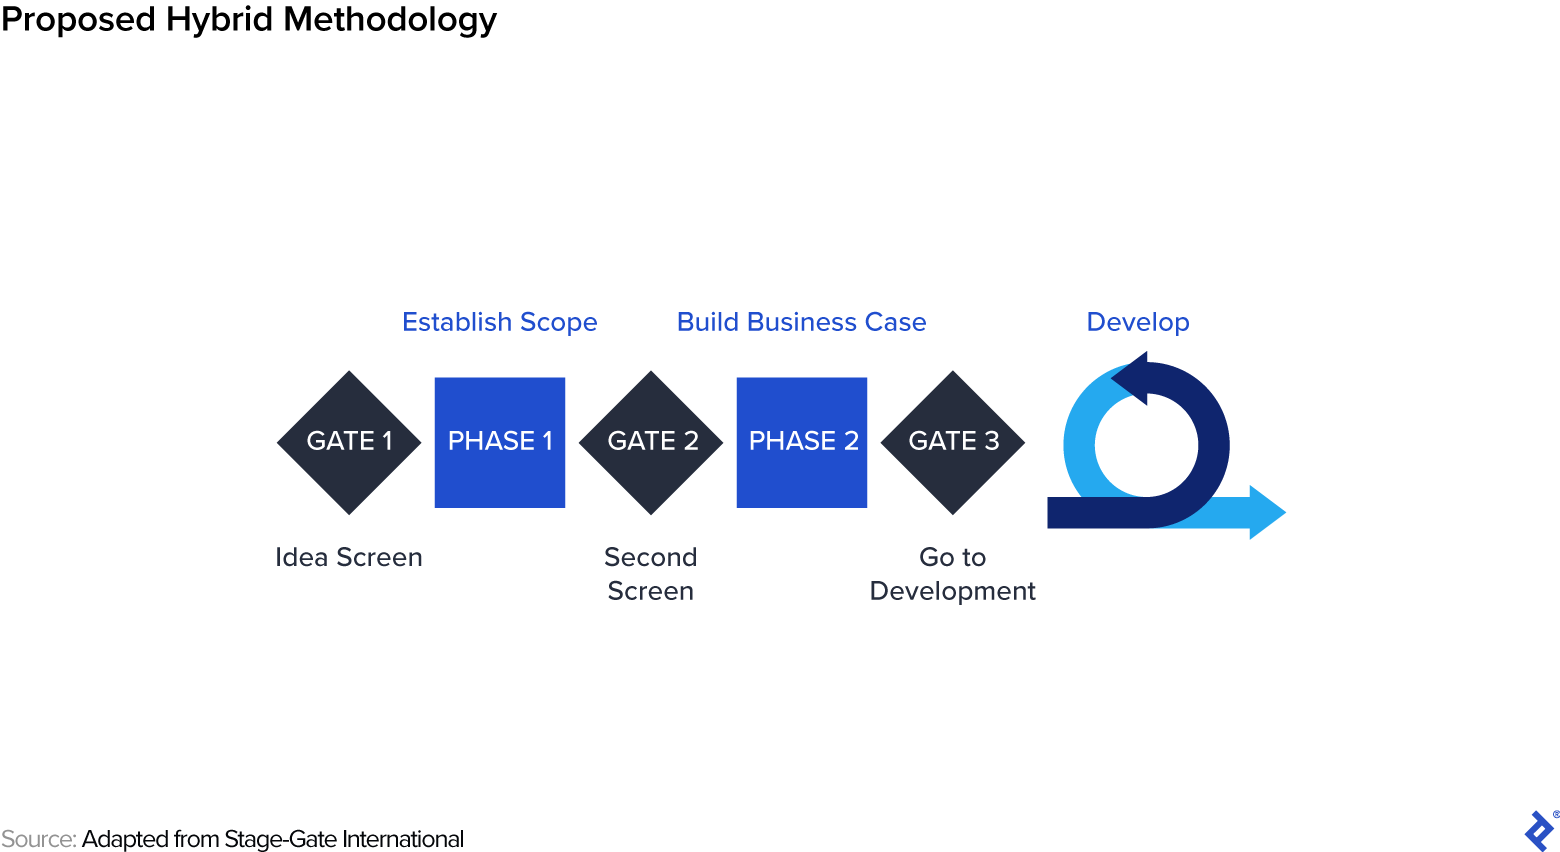 The first three gates and two phases of the phase-gate process, followed by the logo for Agile development.